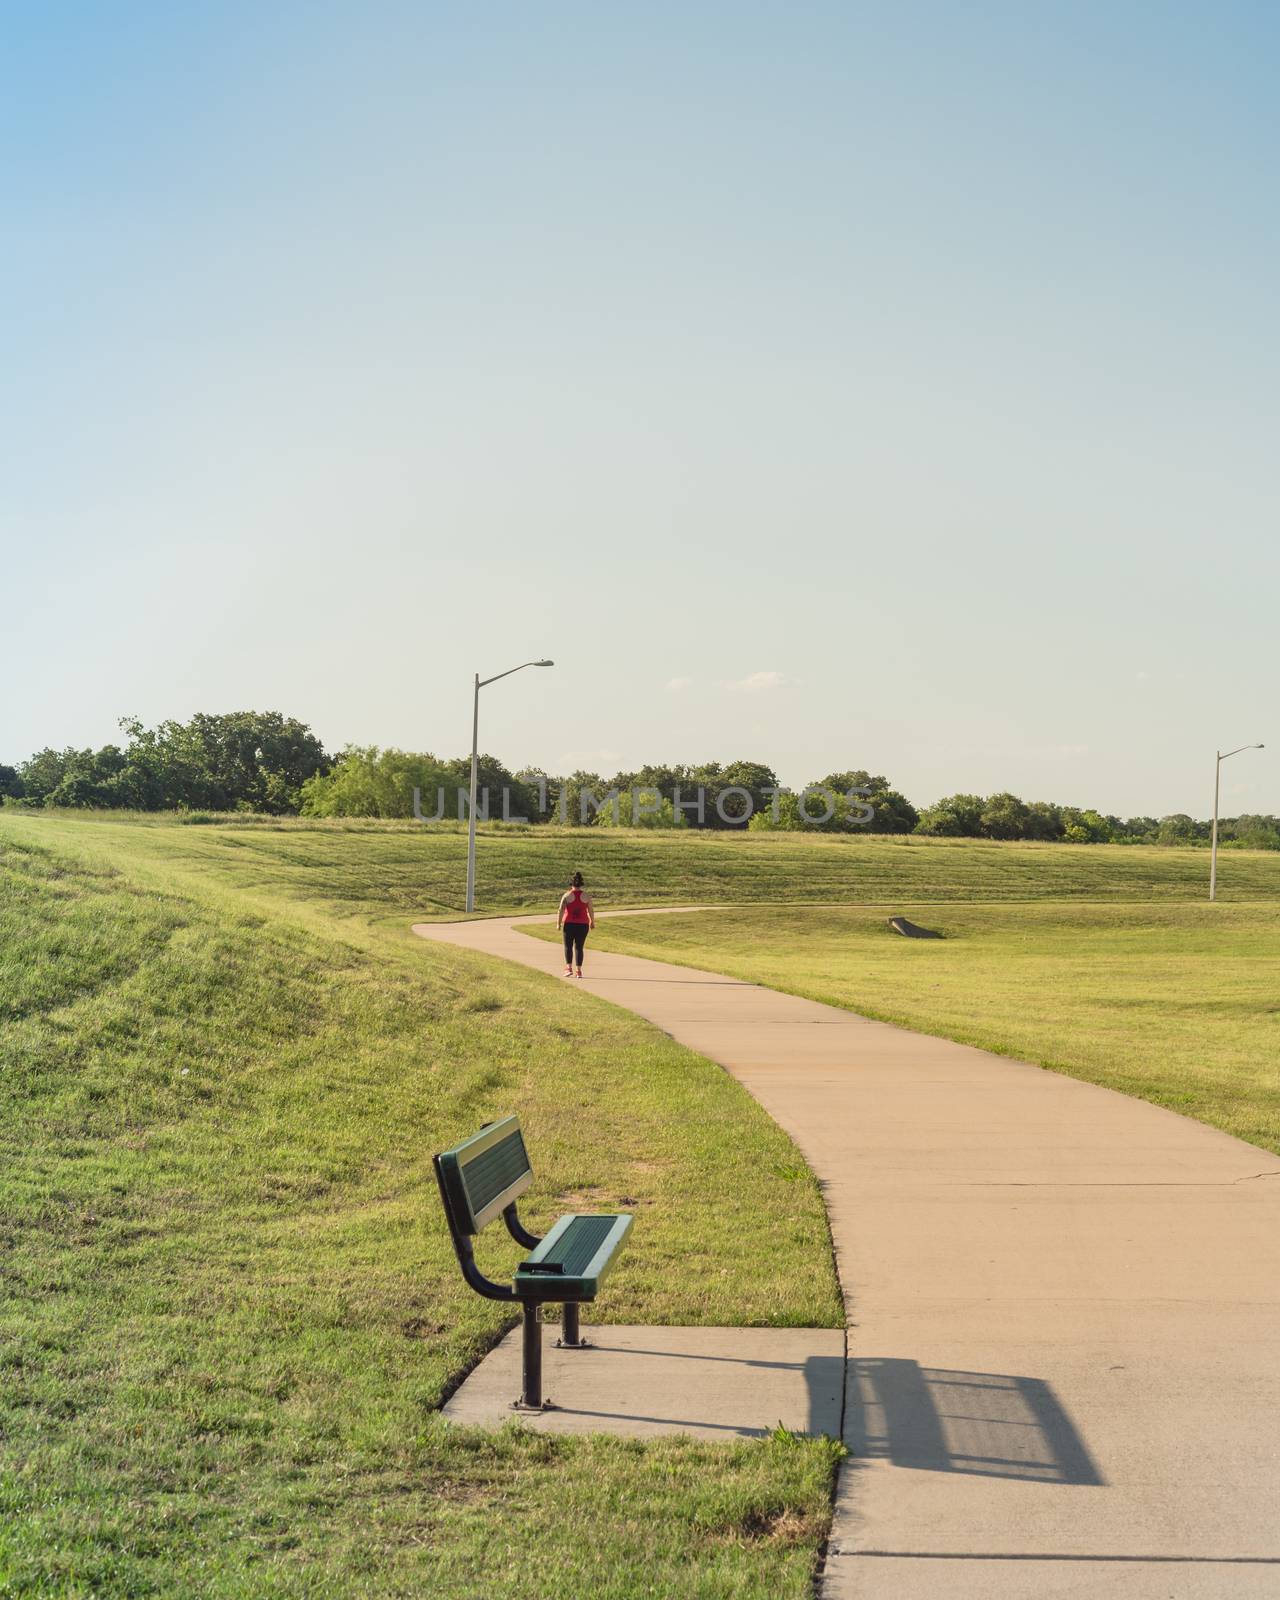 Curved pathway with bench in a hillside urban park near Dallas, Texas, America. Rearview of chubby lady jogging with headphone near lamppost.